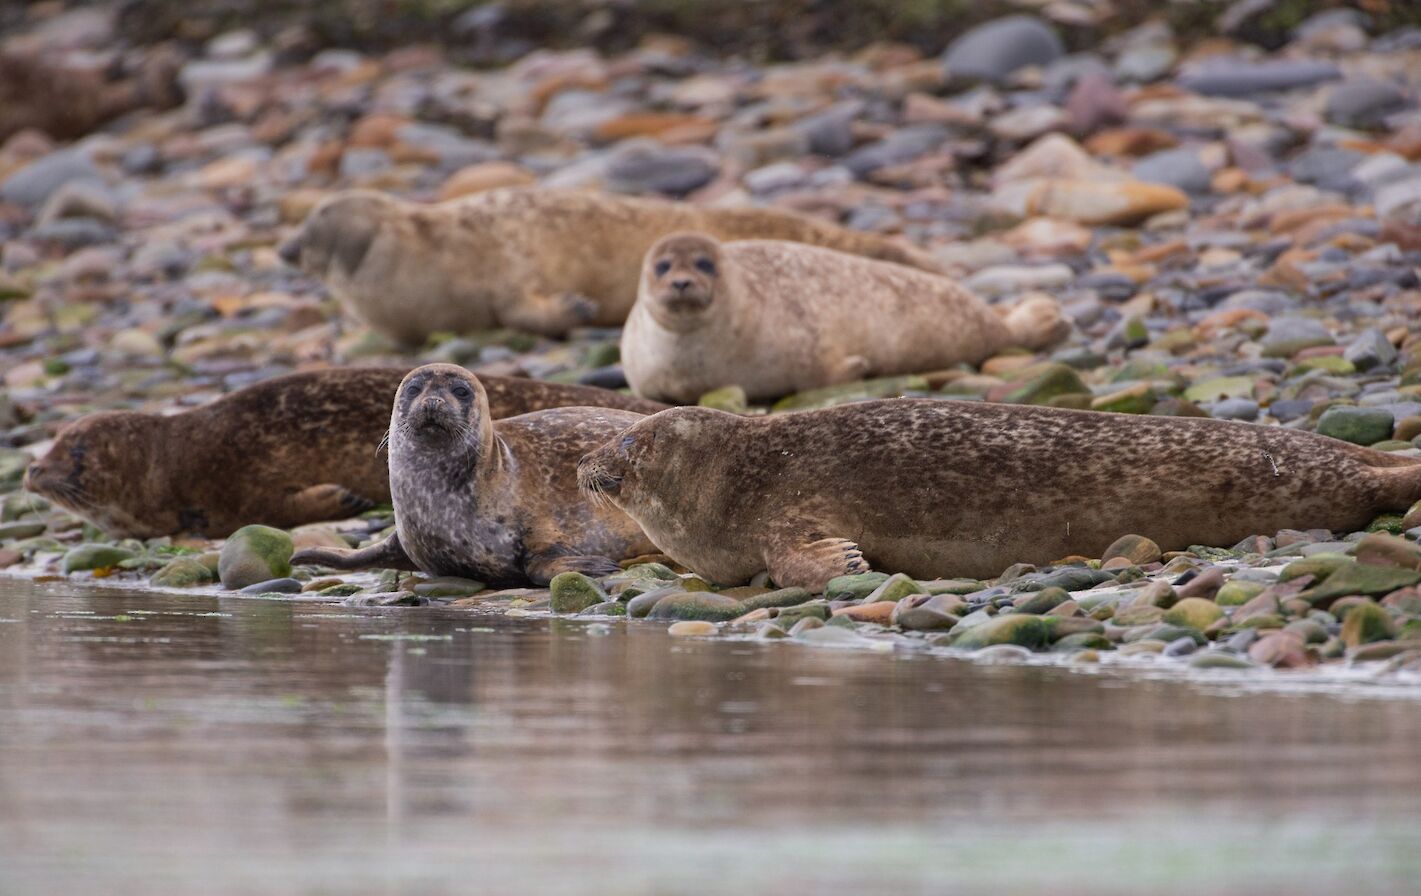 Harbour seals in Orkney - image by Raymond Besant